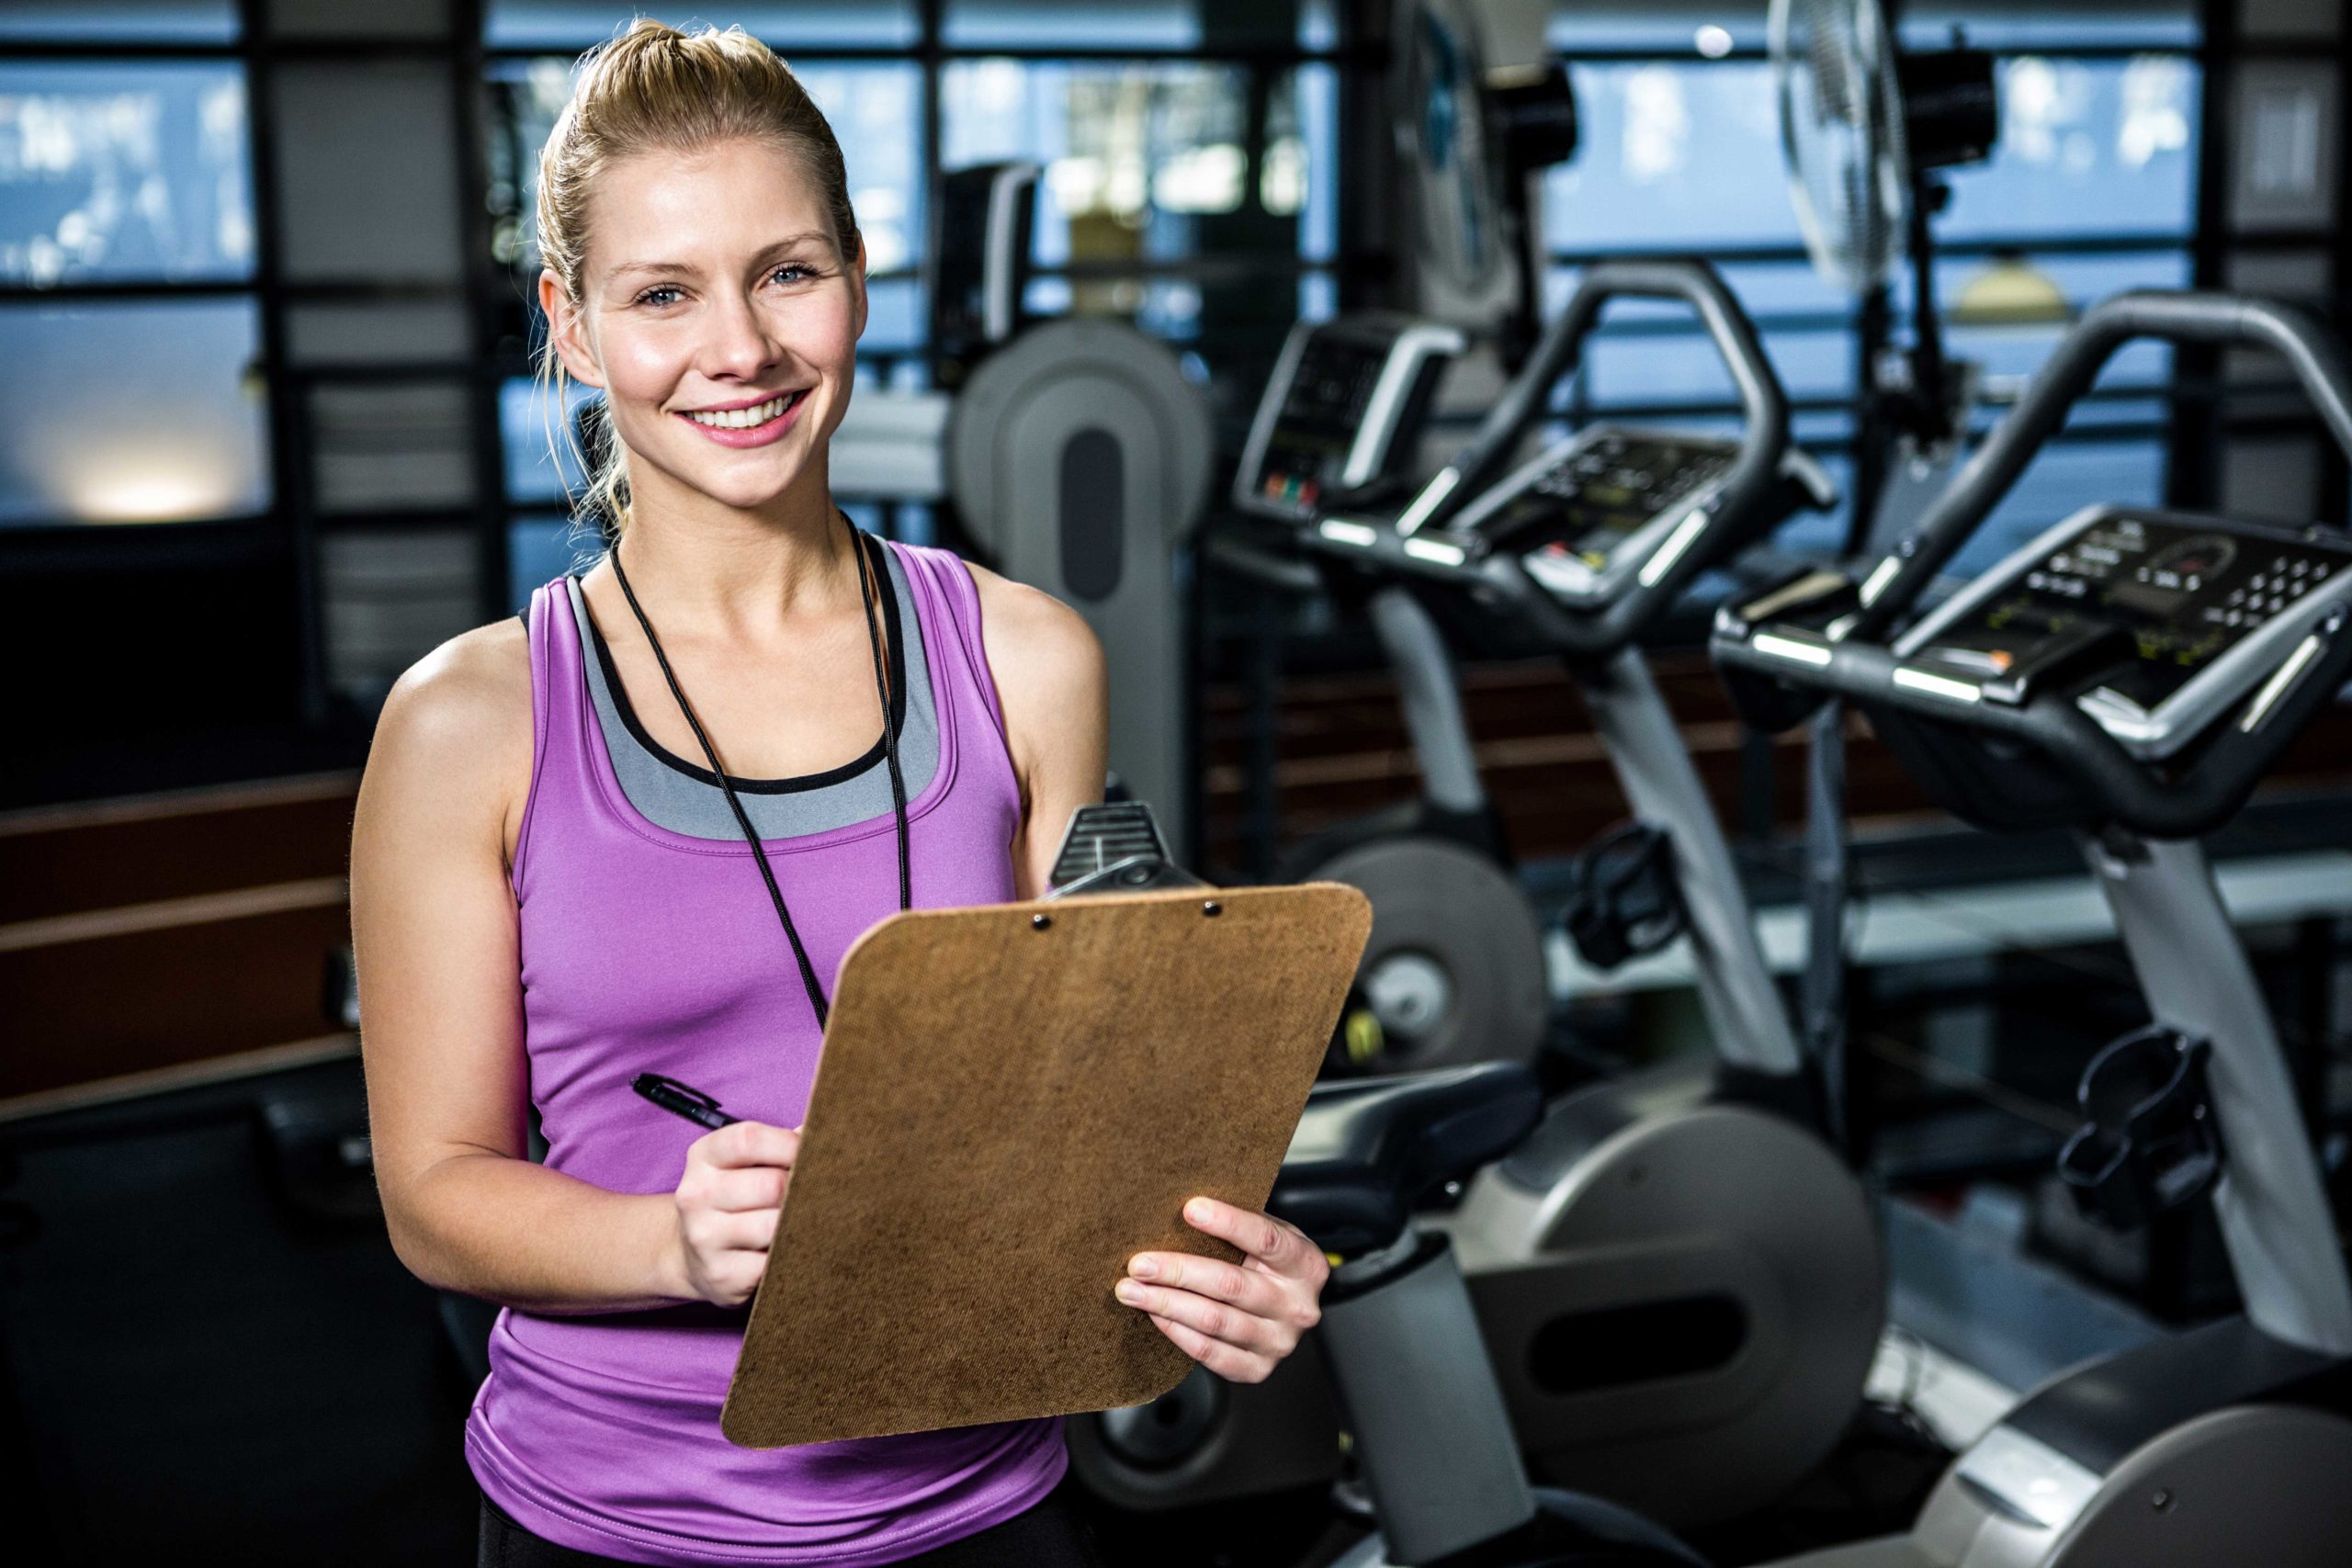 Gym and aerobics instructor jobs melbourne